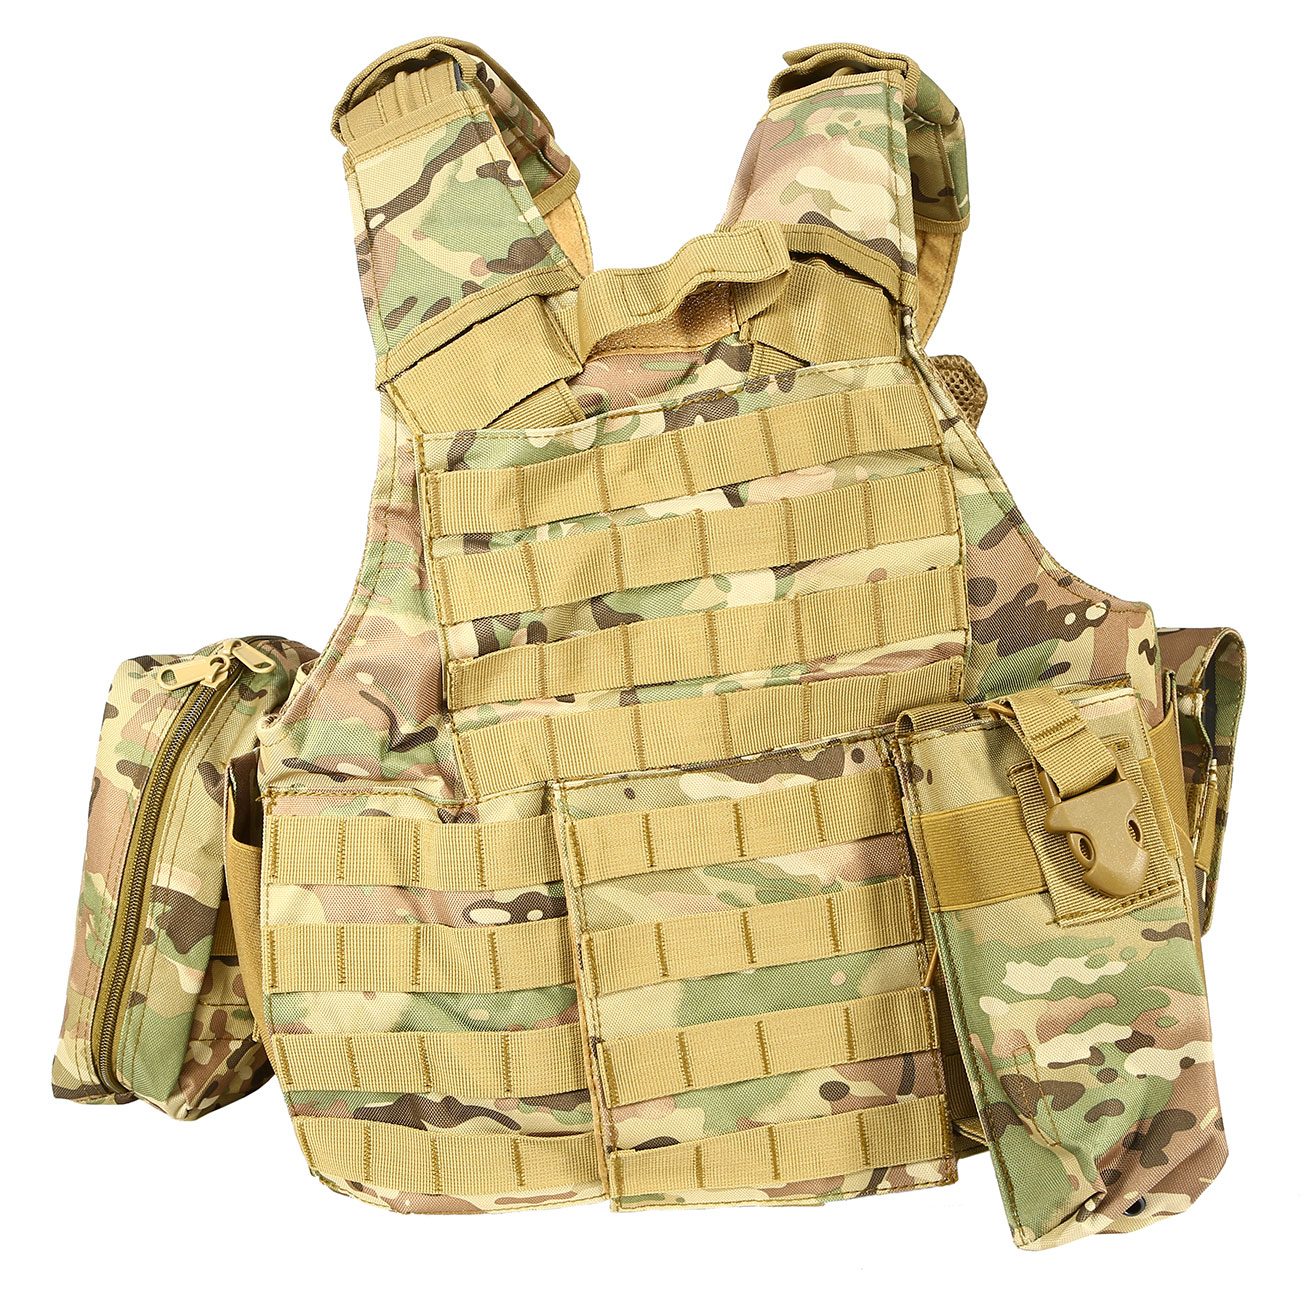 MOLLE Vest Paintball Tactical Military Vest mit Multicam-Muster Military Camo Chest Rig Tactical Vest für Airsoft Verstellbare leichte Kampfweste DIGITAL Jungle Camouflage